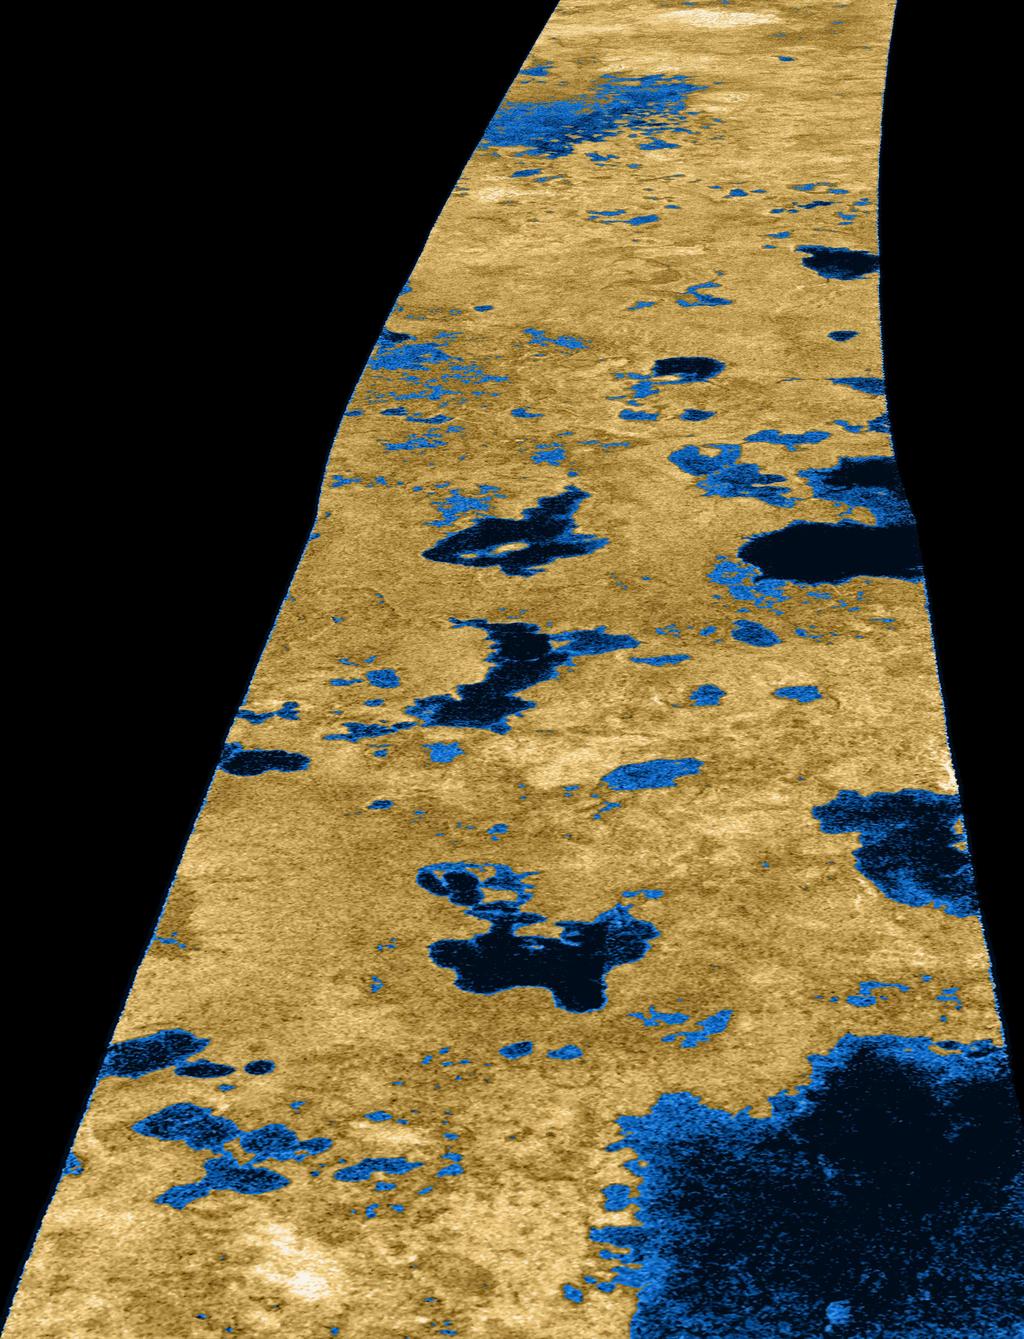 Titan s surface The surface pressure is comparable to that of the Earth (50% larger) ps=1.